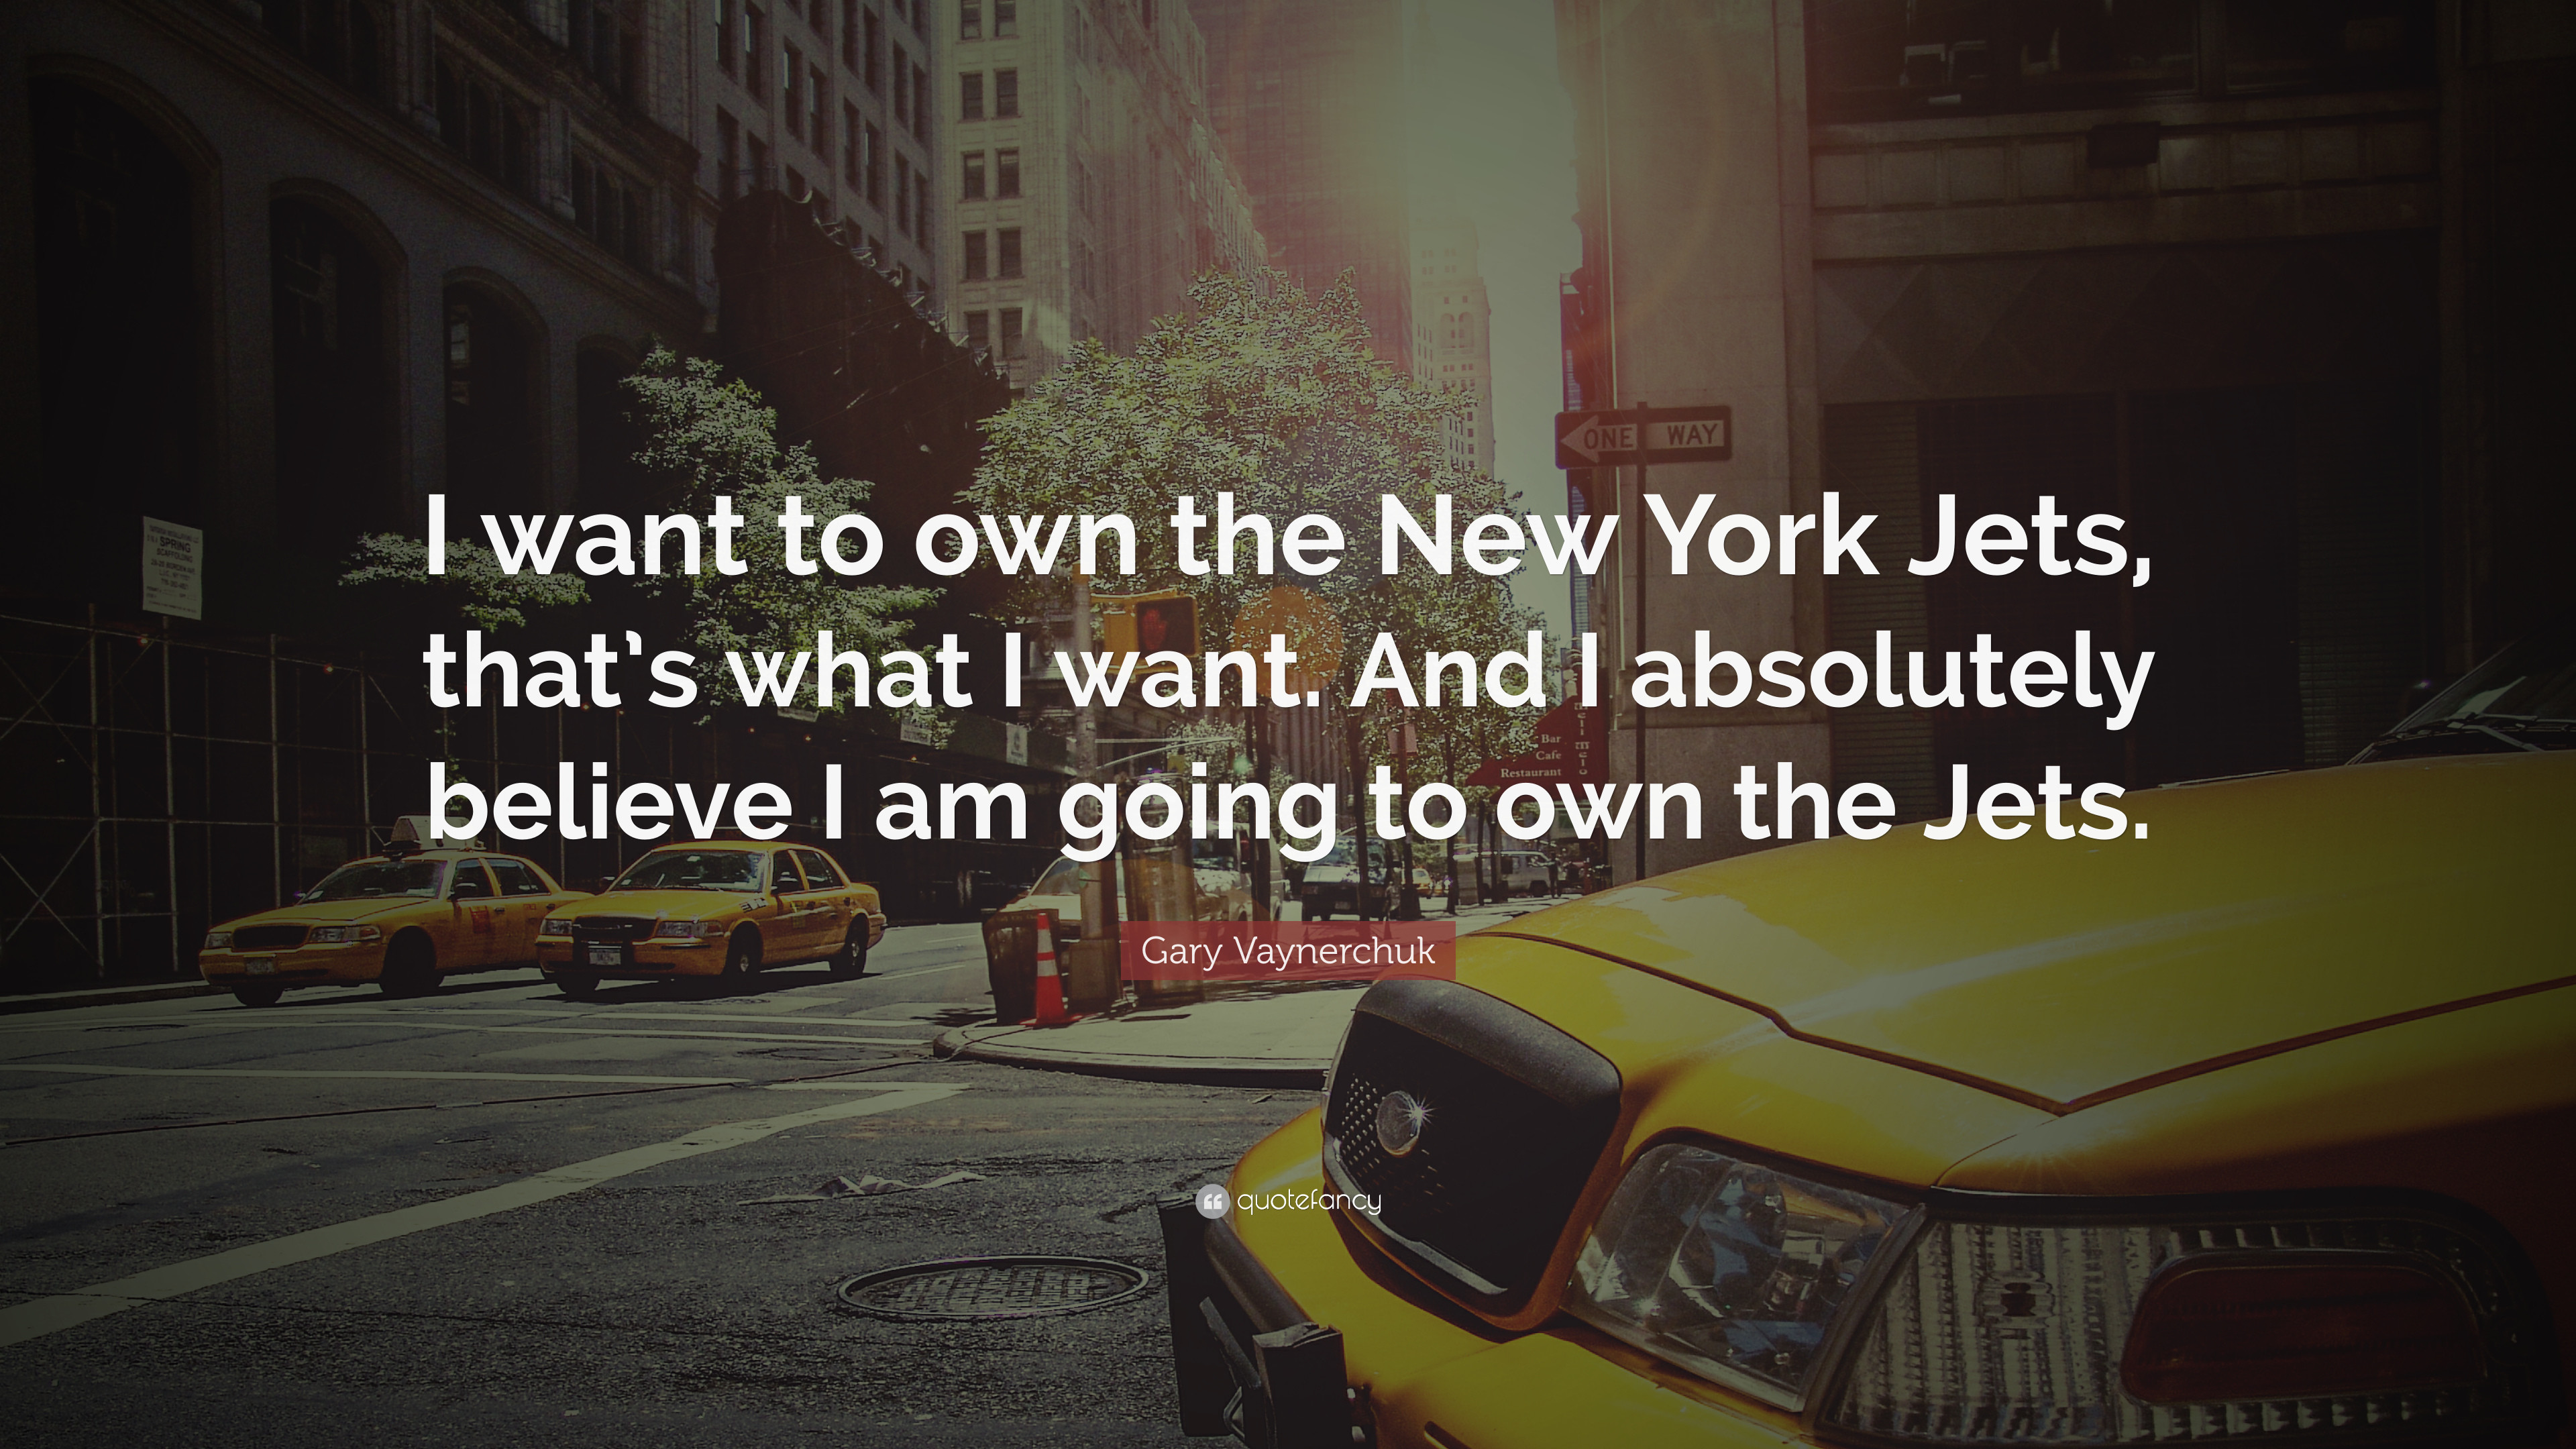 3840x2160 Gary Vaynerchuk Quote: “I want to own the New York Jets, that's what